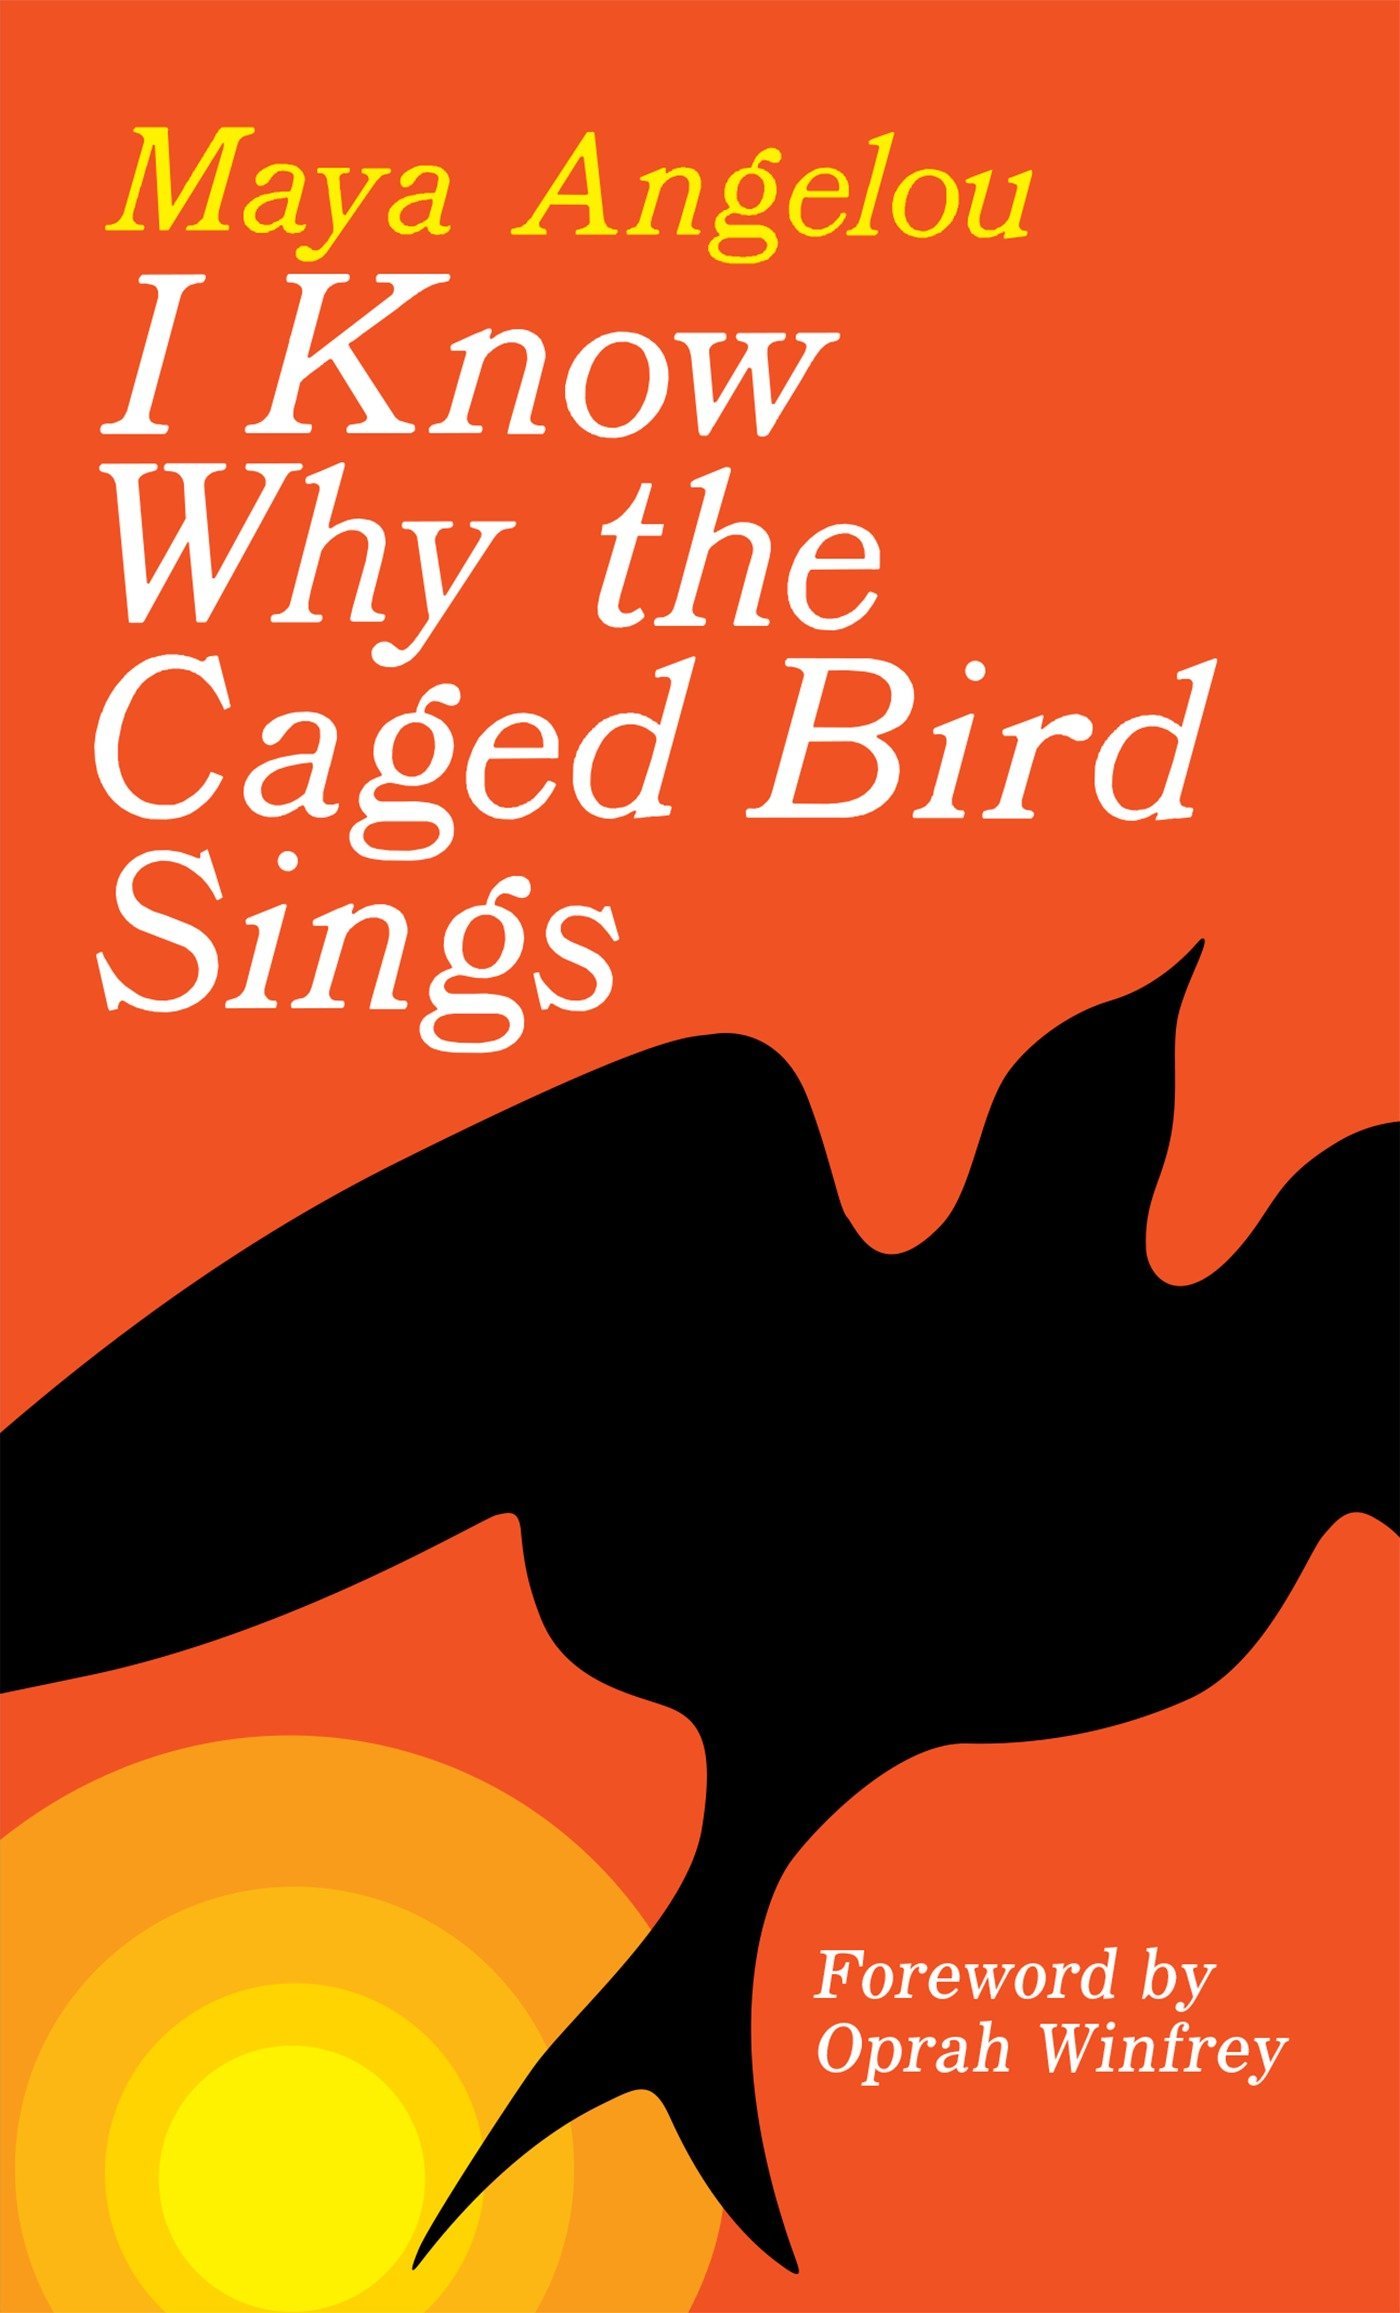 The cover of Maya Angelou's book "I Know Why the Caged Bird Sings."